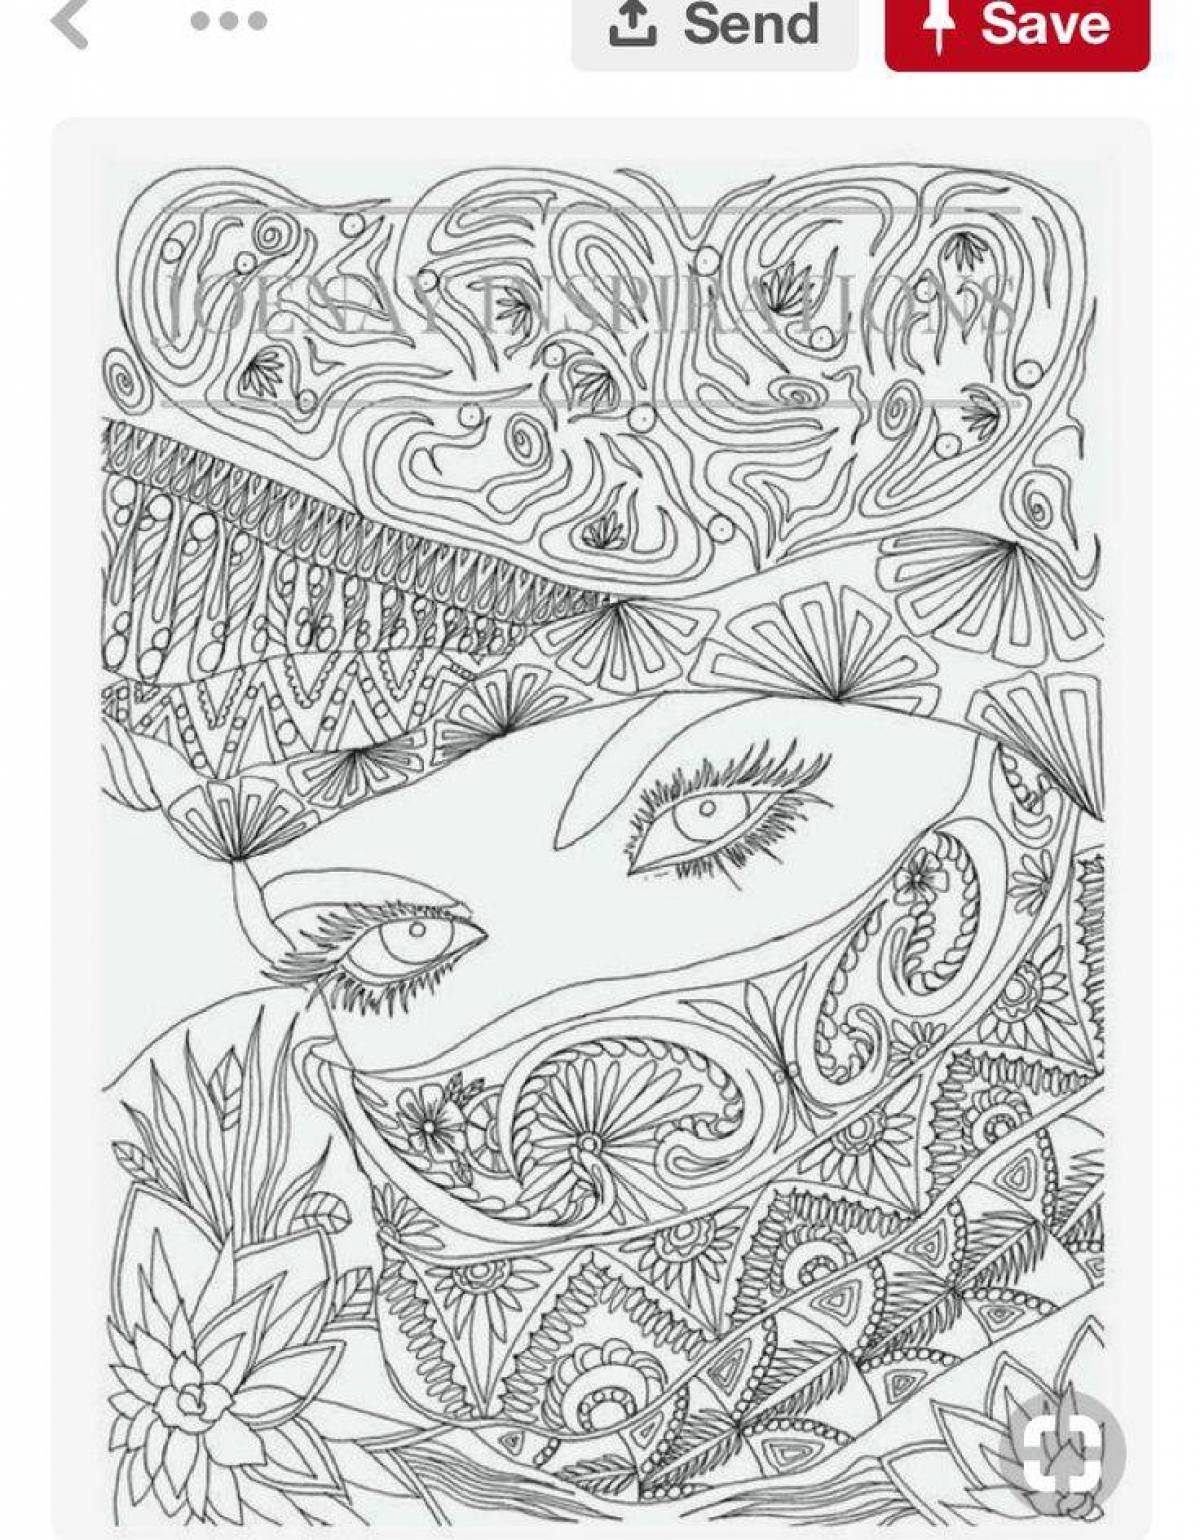 Soothing coloring book for adults